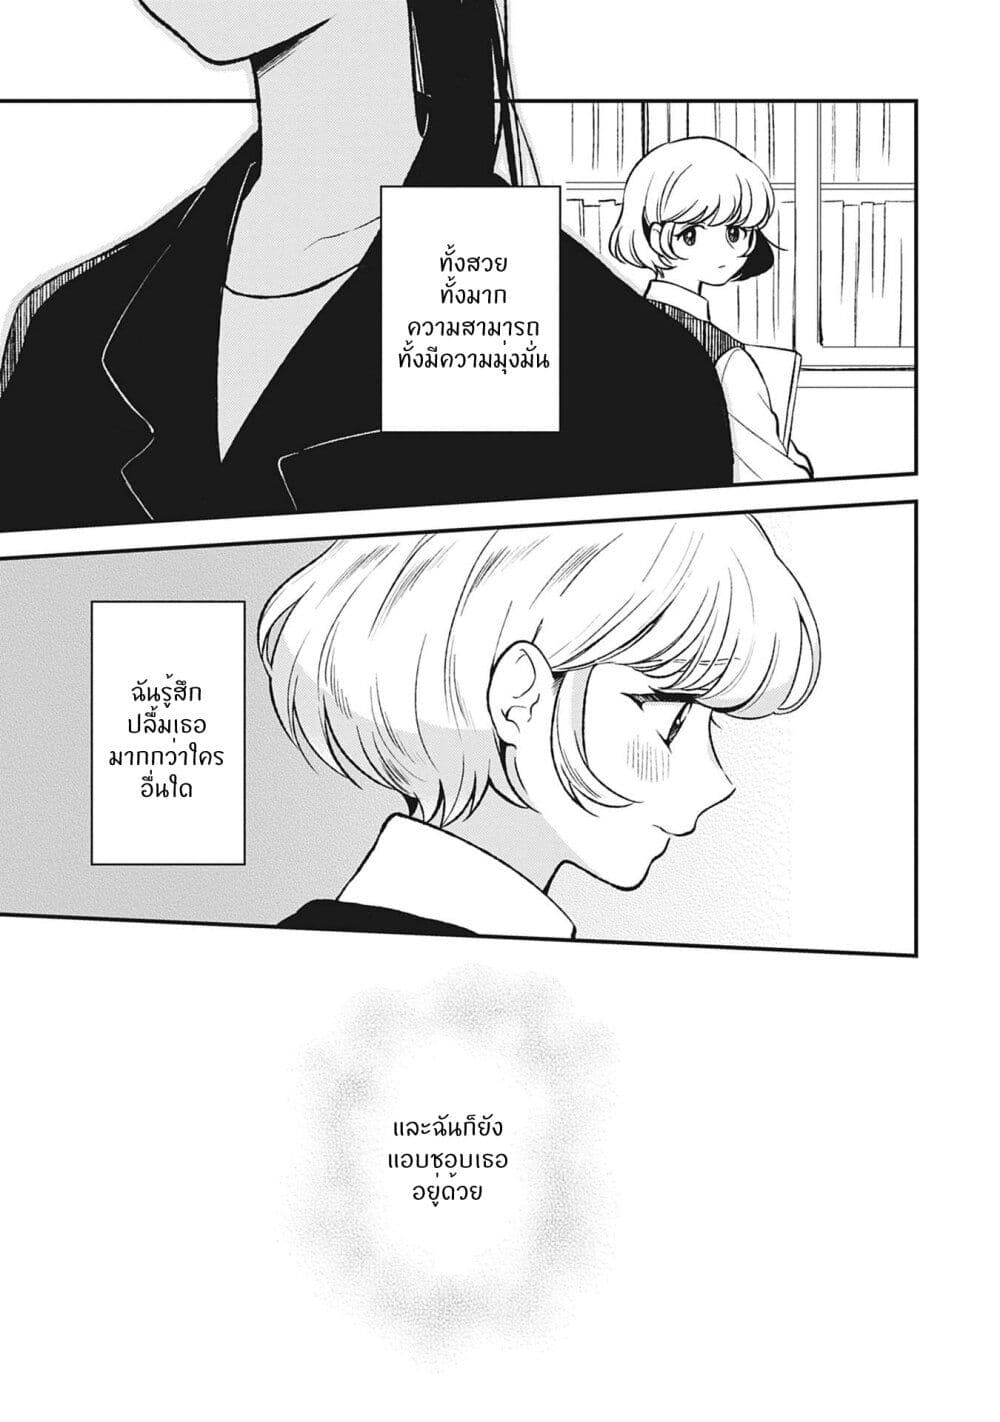 The Back Alley Romance Story ตอนที่ 3 (3)